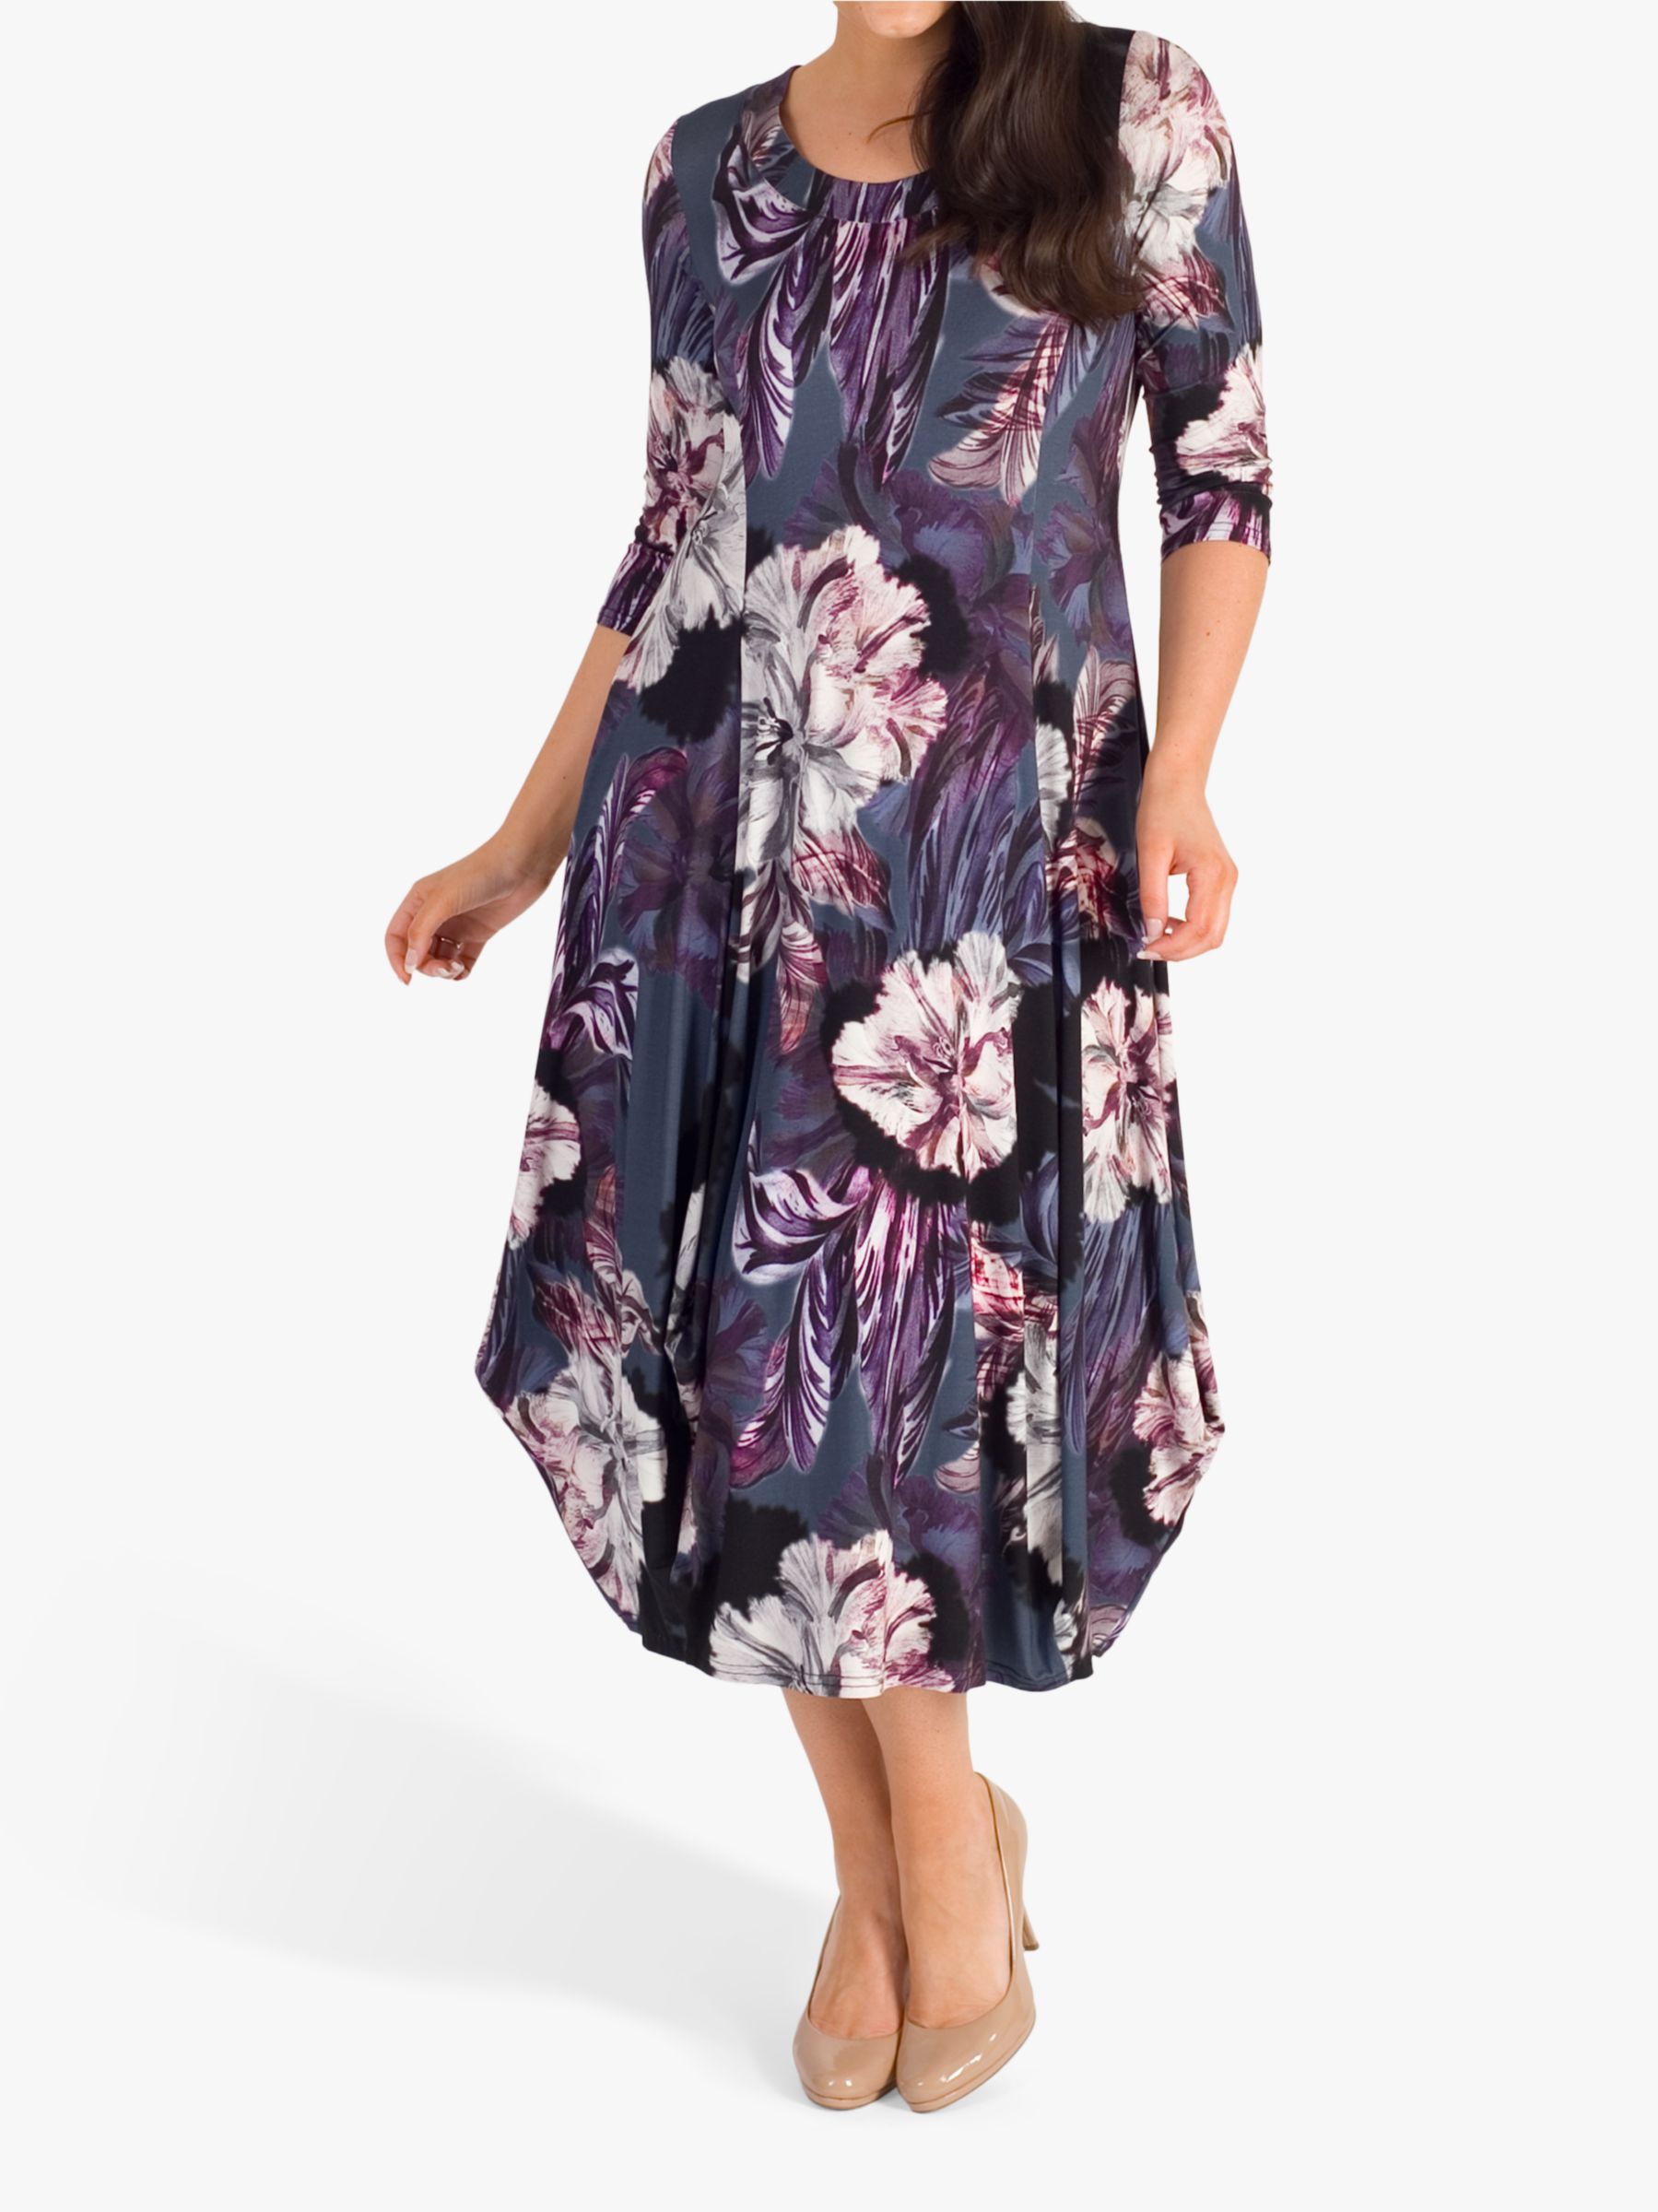 Chesca Floral Print Jersey Dress, Pewter